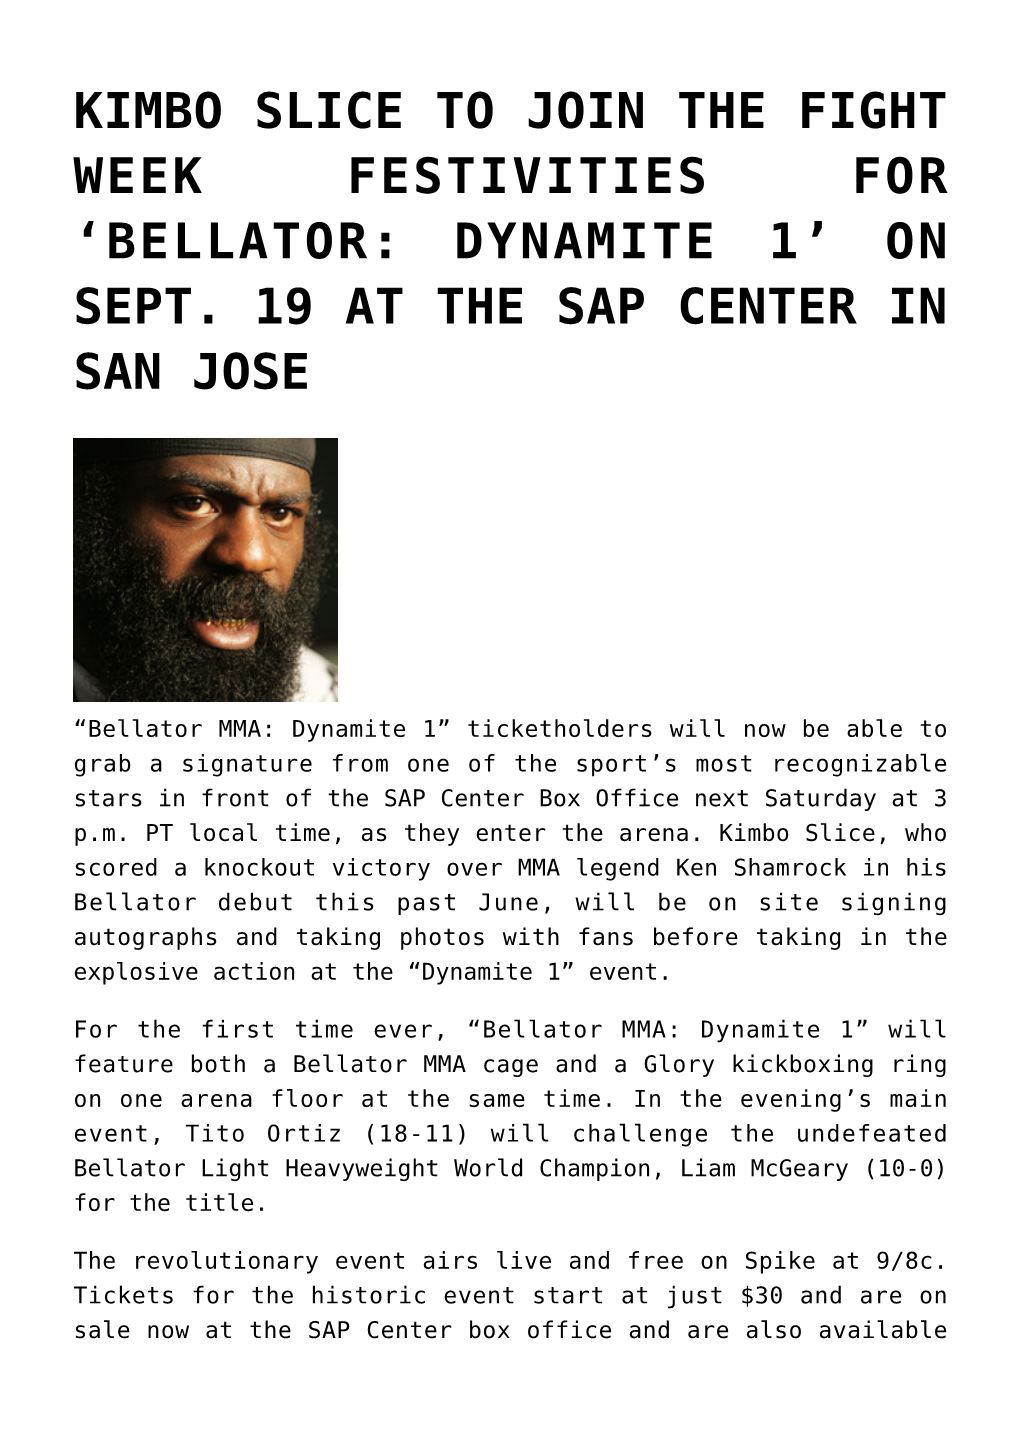 Kimbo Slice to Join the Fight Week Festivities for ‘Bellator: Dynamite 1’ on Sept